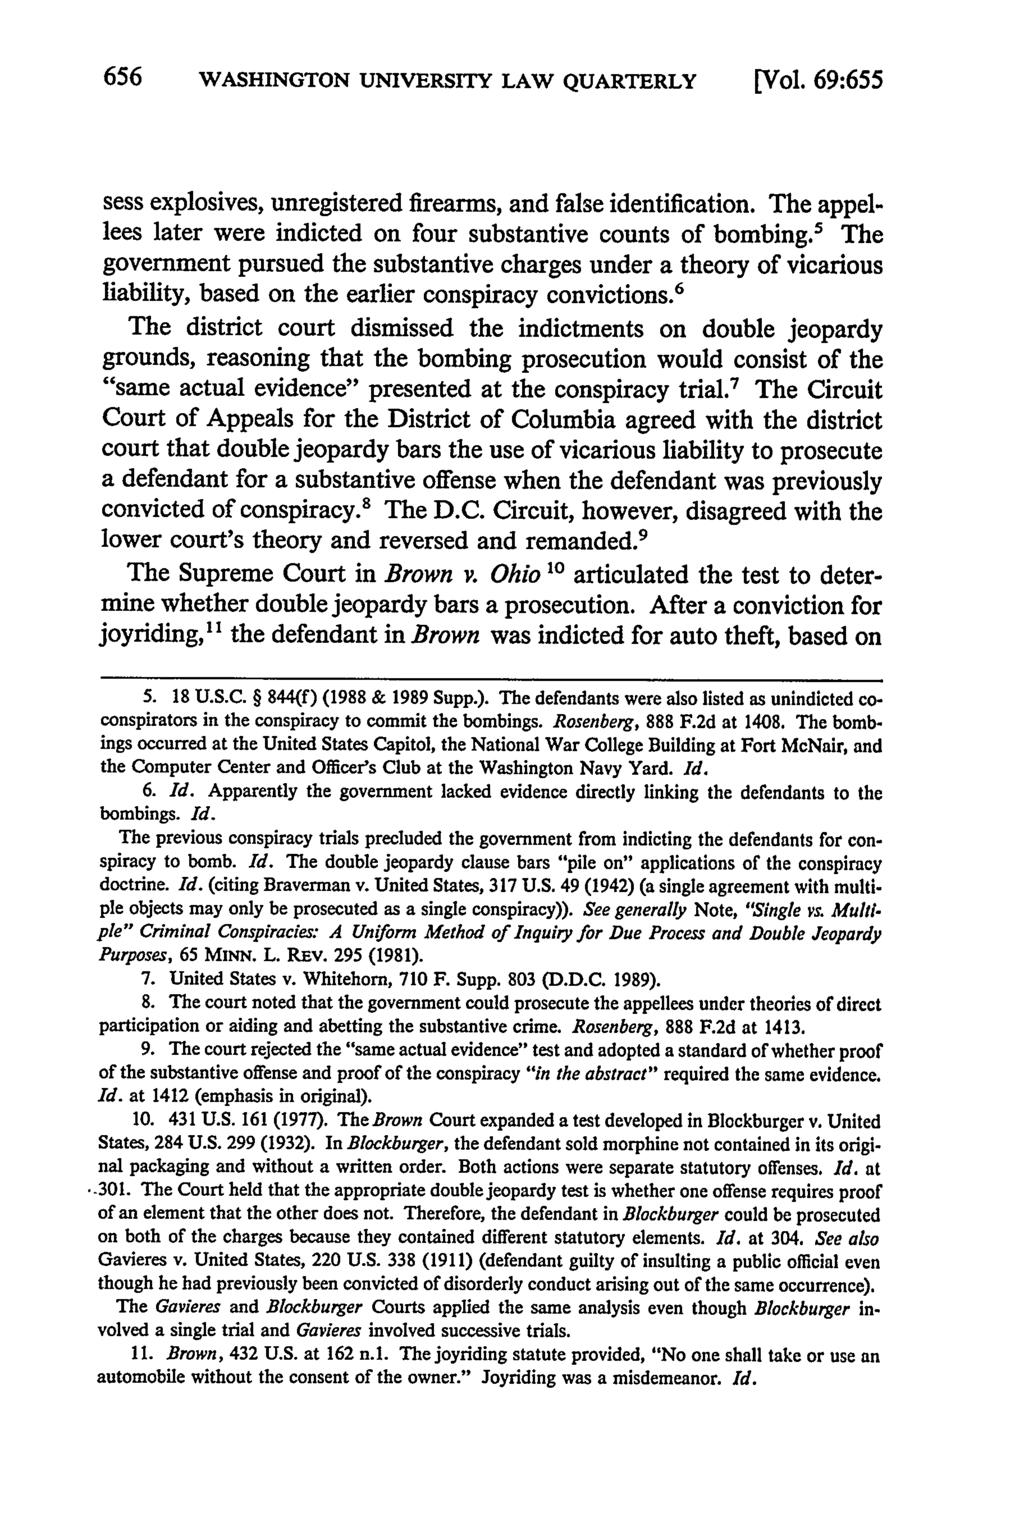 WASHINGTON UNIVERSITY LAW QUARTERLY [Vol. 69:655 sess explosives, unregistered firearms, and false identification. The appellees later were indicted on four substantive counts of bombing.